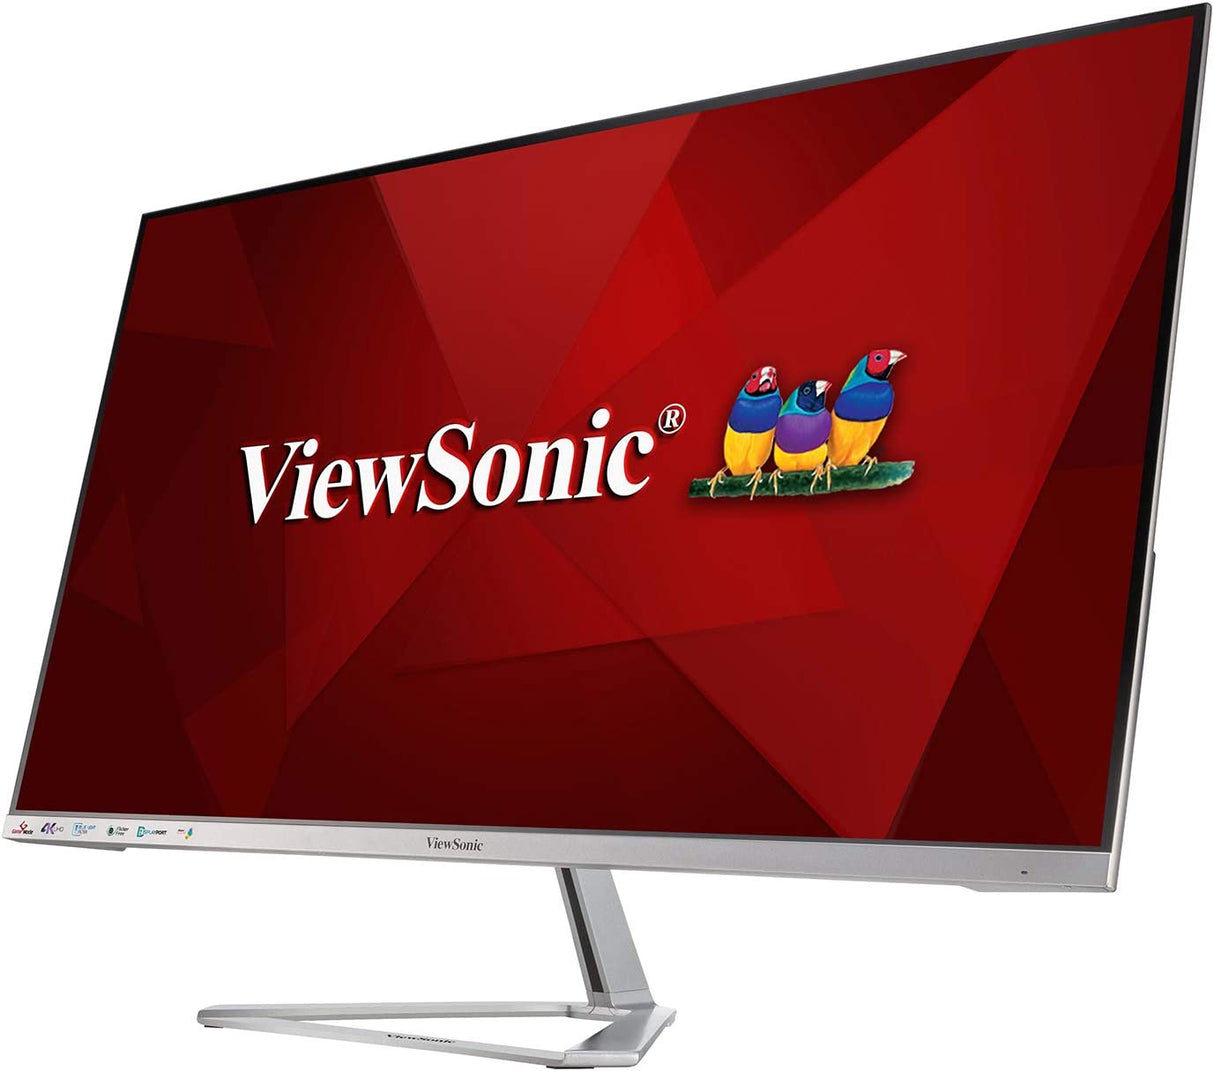 ViewSonic VX3276-4K-MHD 32 Inch 4K UHD Monitor with Ultra-Thin Bezels, HDR10 HDMI and DisplayPort for Home and Office 32-Inch 4K UHD